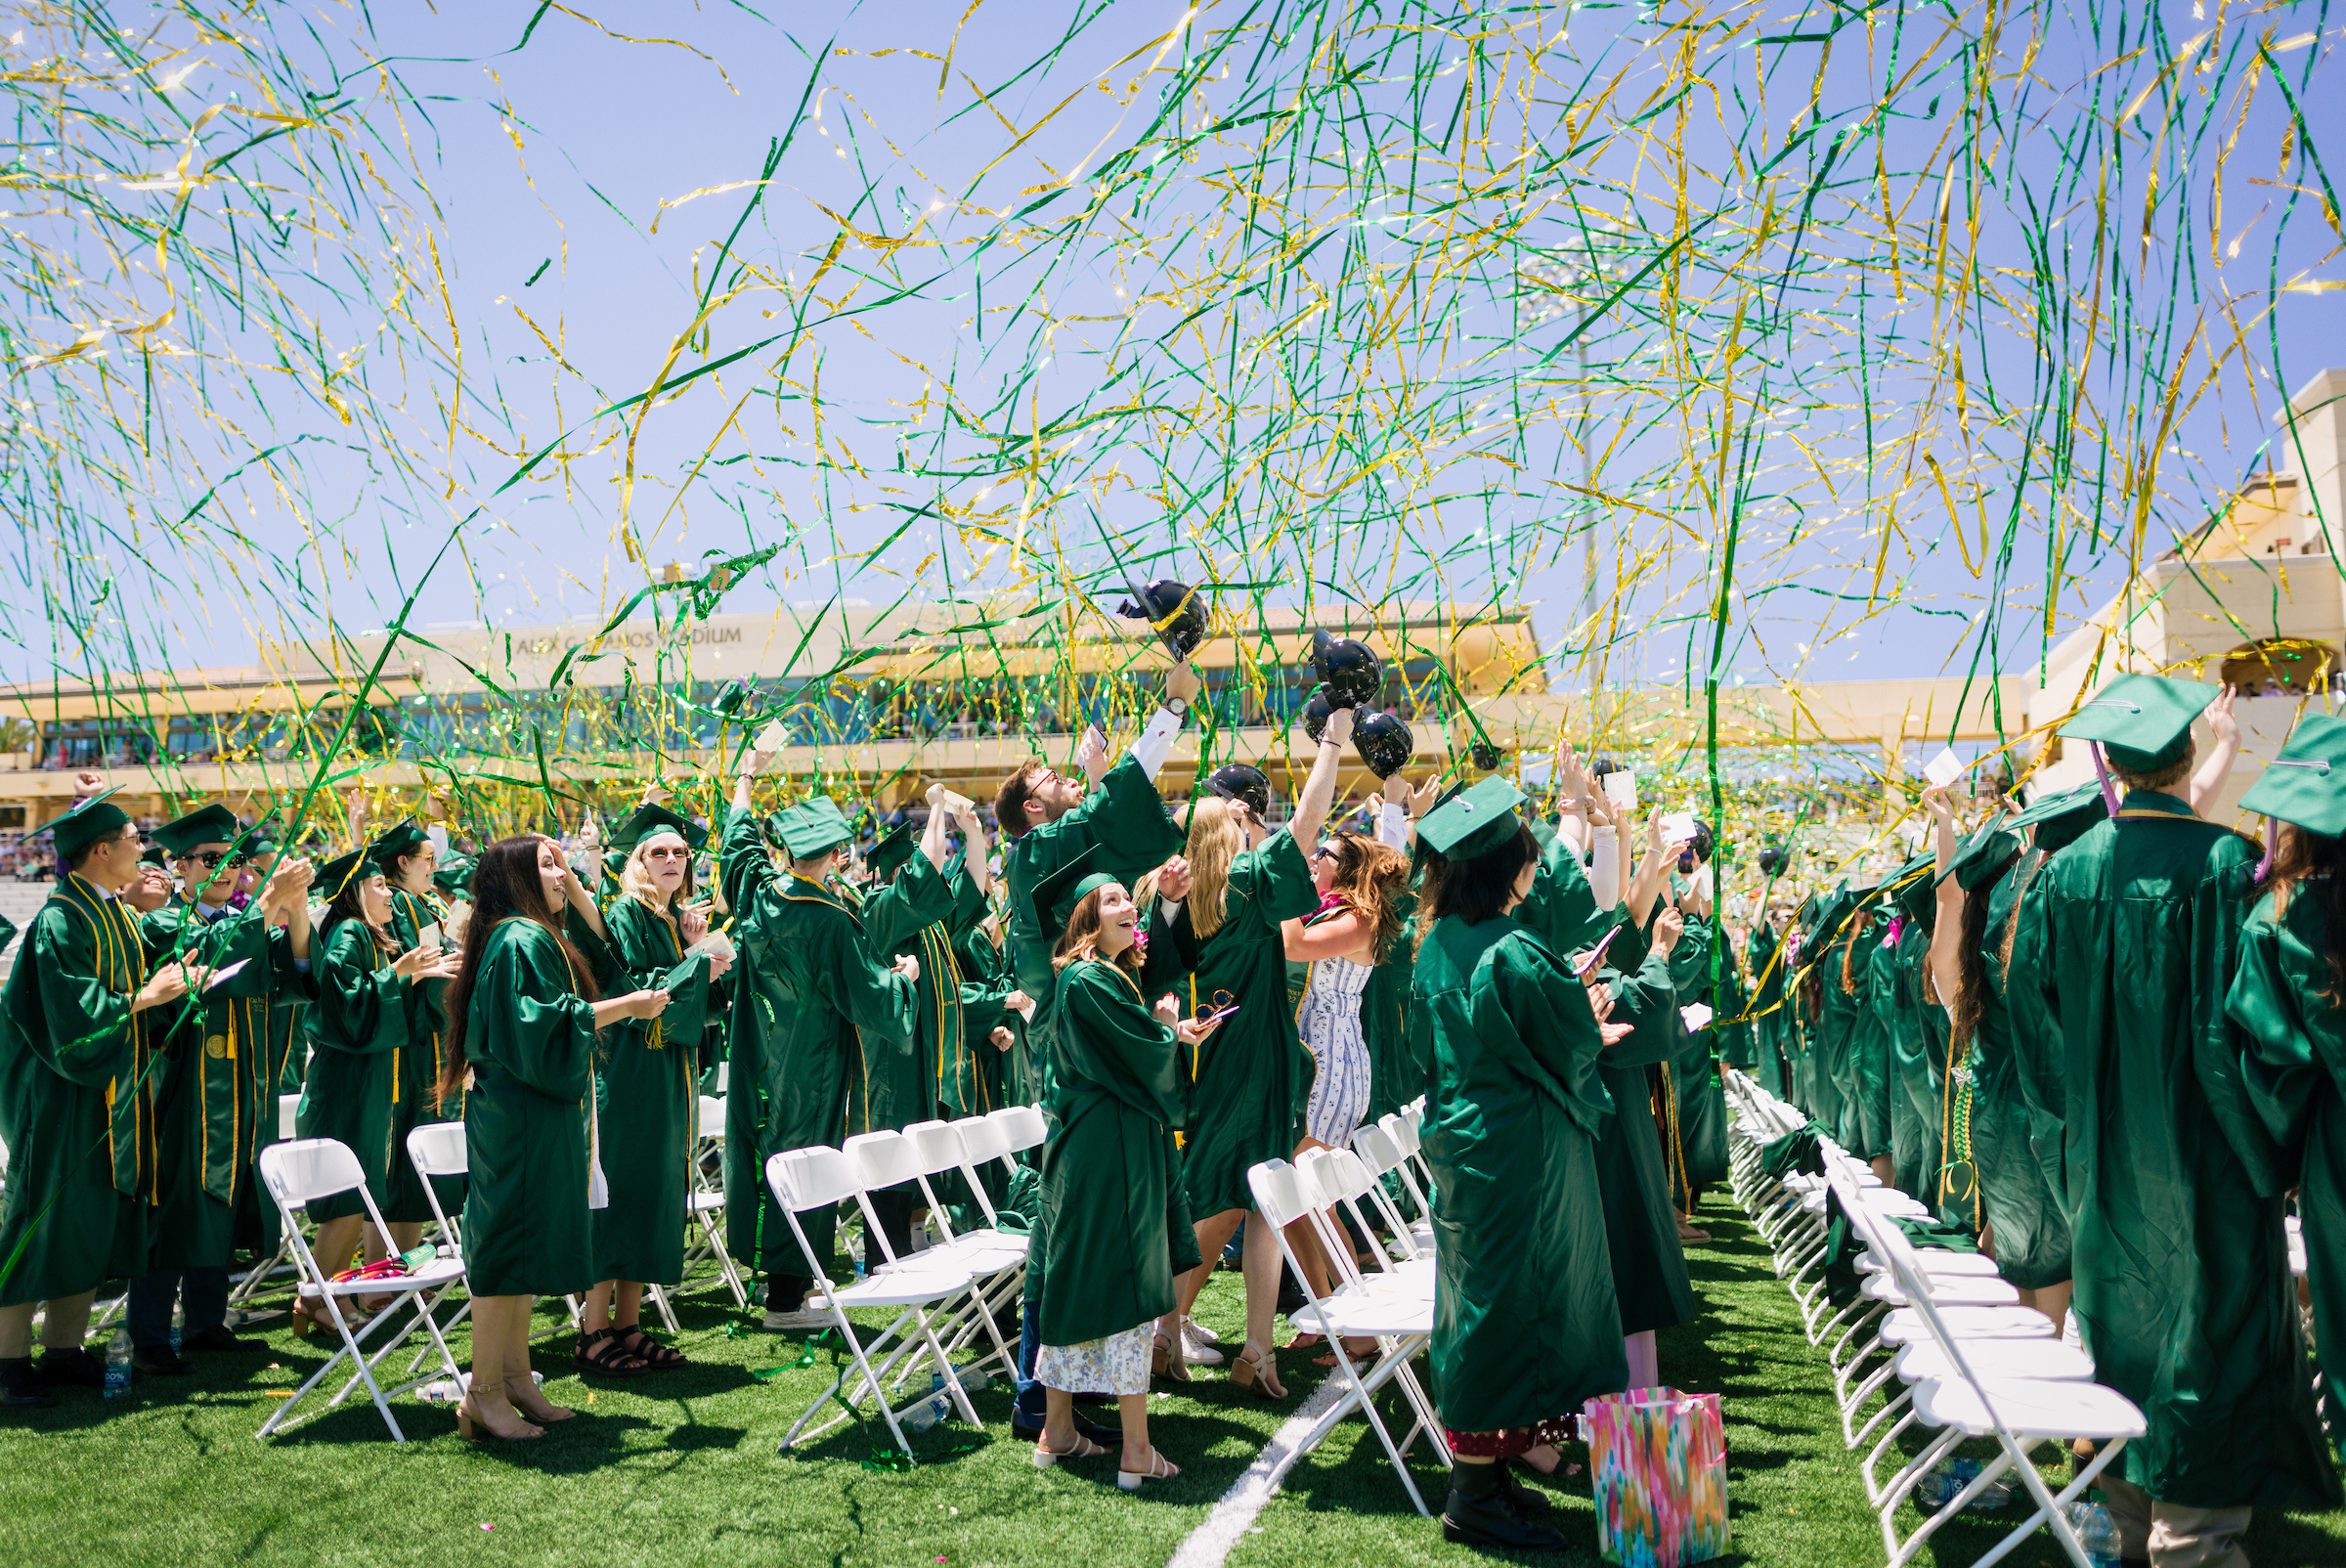 Students in green graduation robes stand at the commencement ceremony while green and gold streamers fly around.